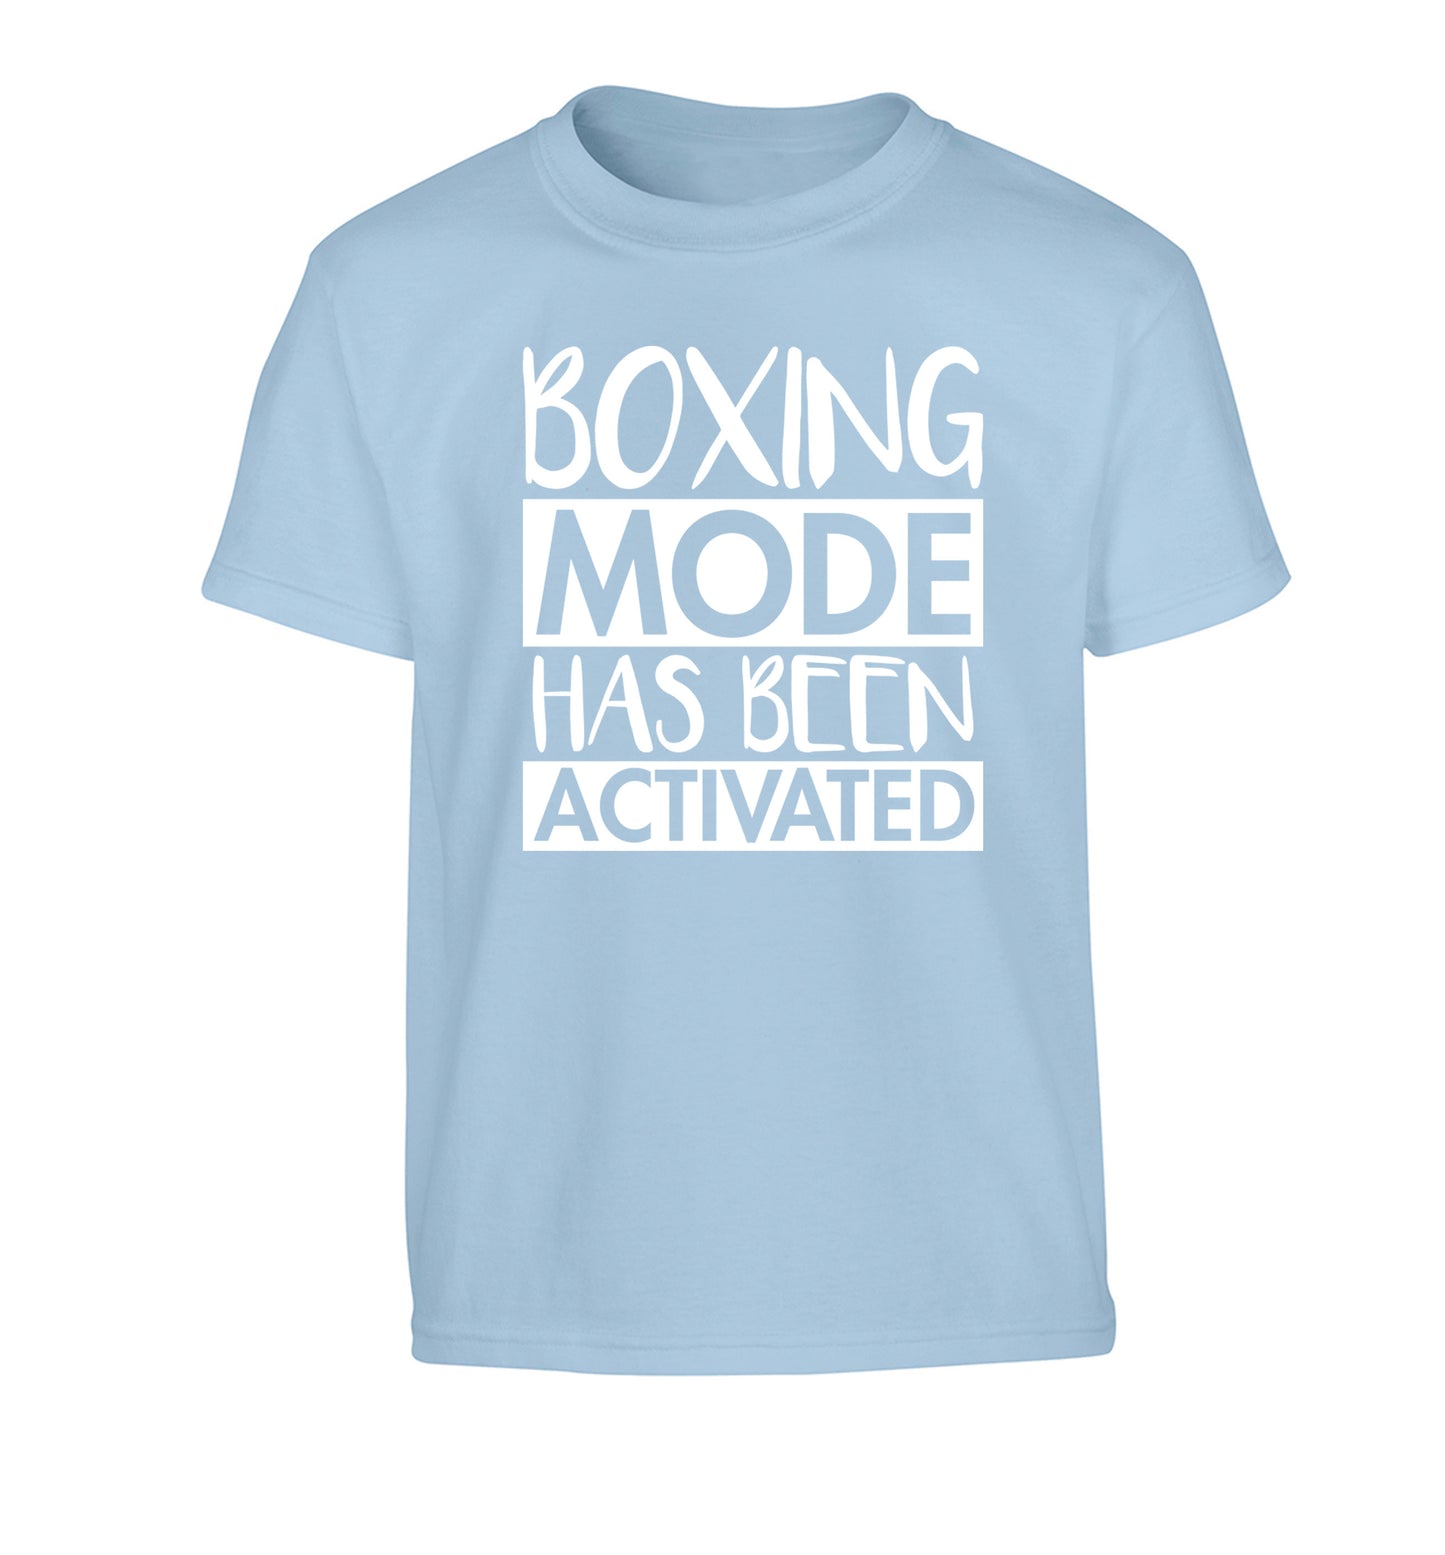 Boxing mode activated Children's light blue Tshirt 12-14 Years